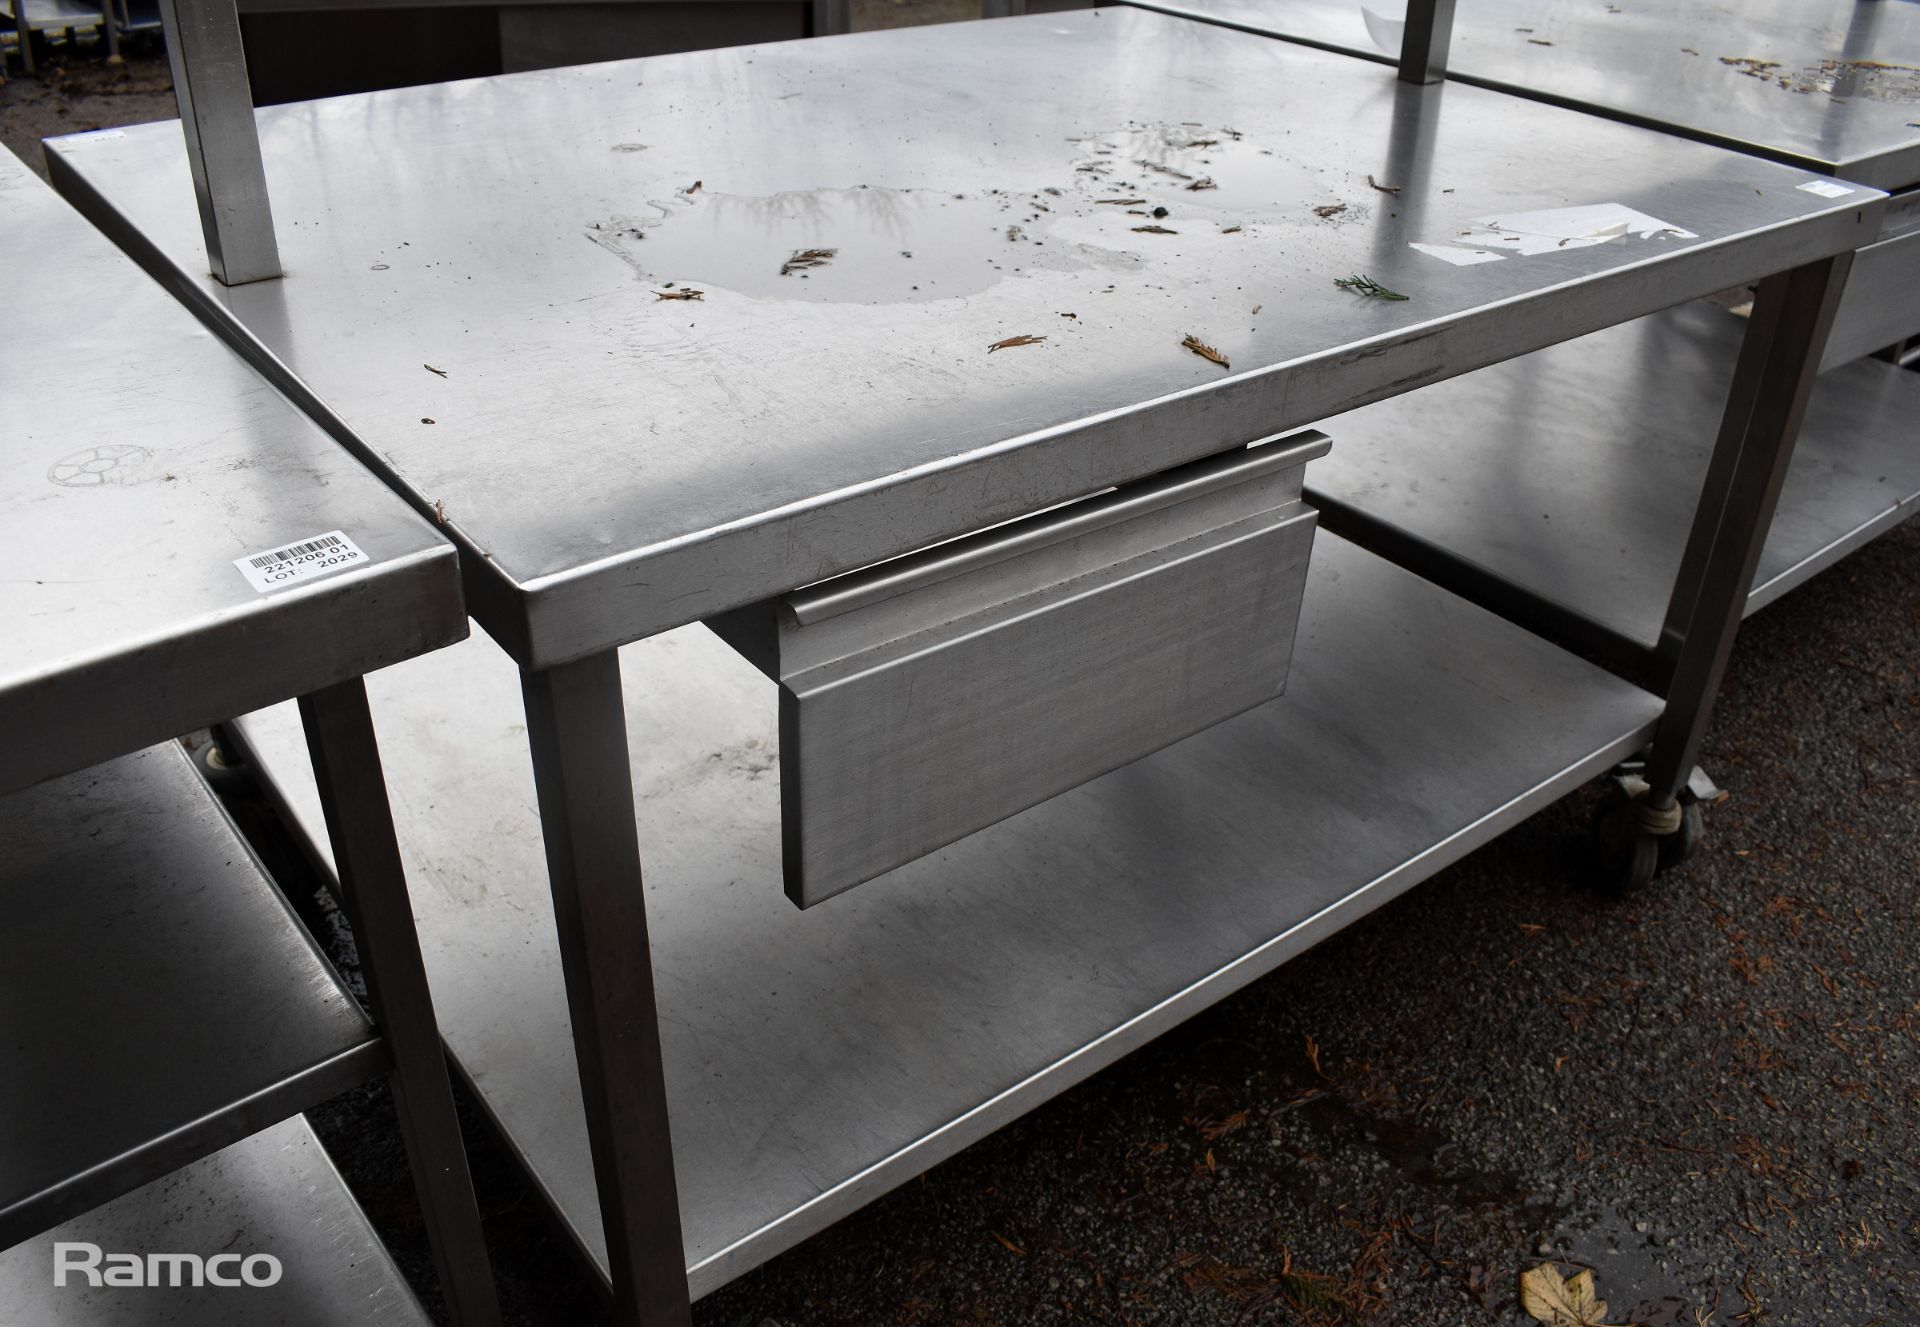 Stainless steel table on casters - 140 x 110 x 130cm with shelf - Image 3 of 5